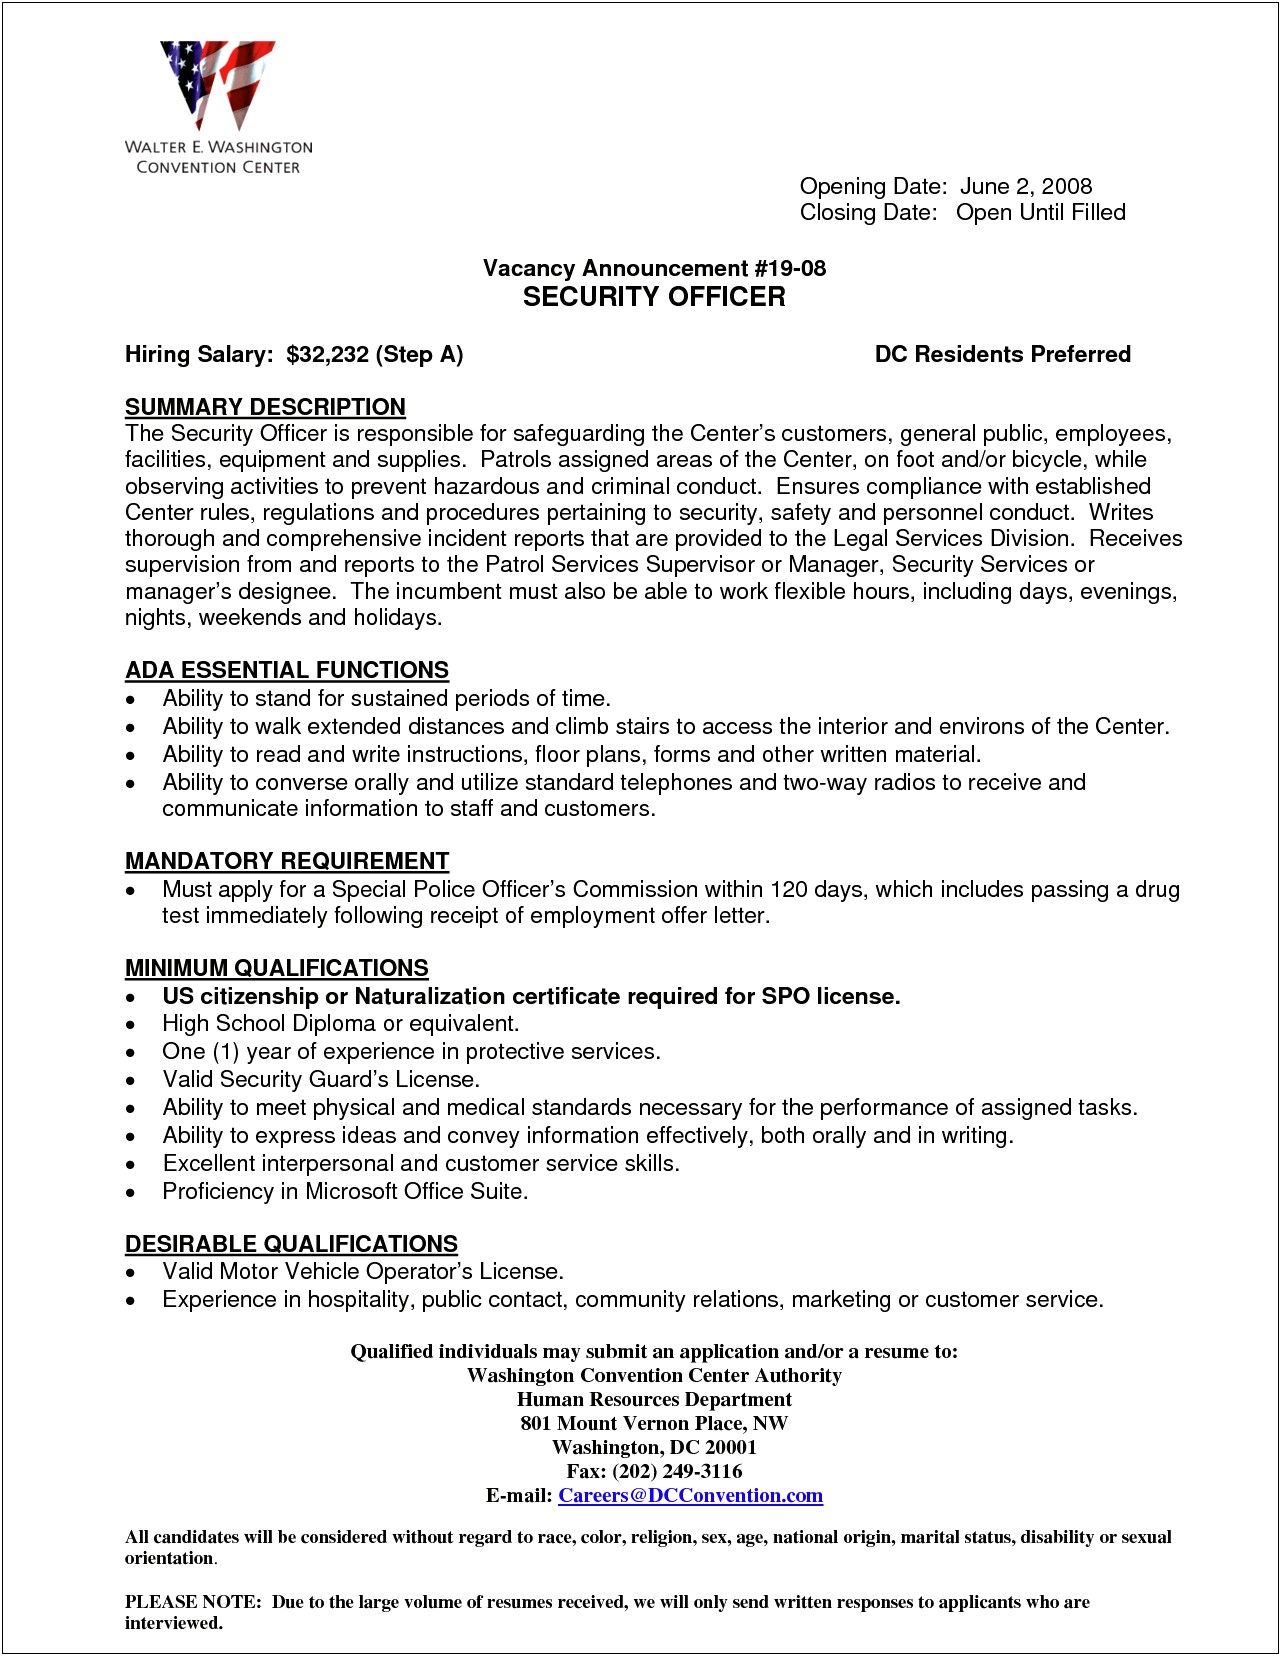 Probation Officer Resume With No Experience